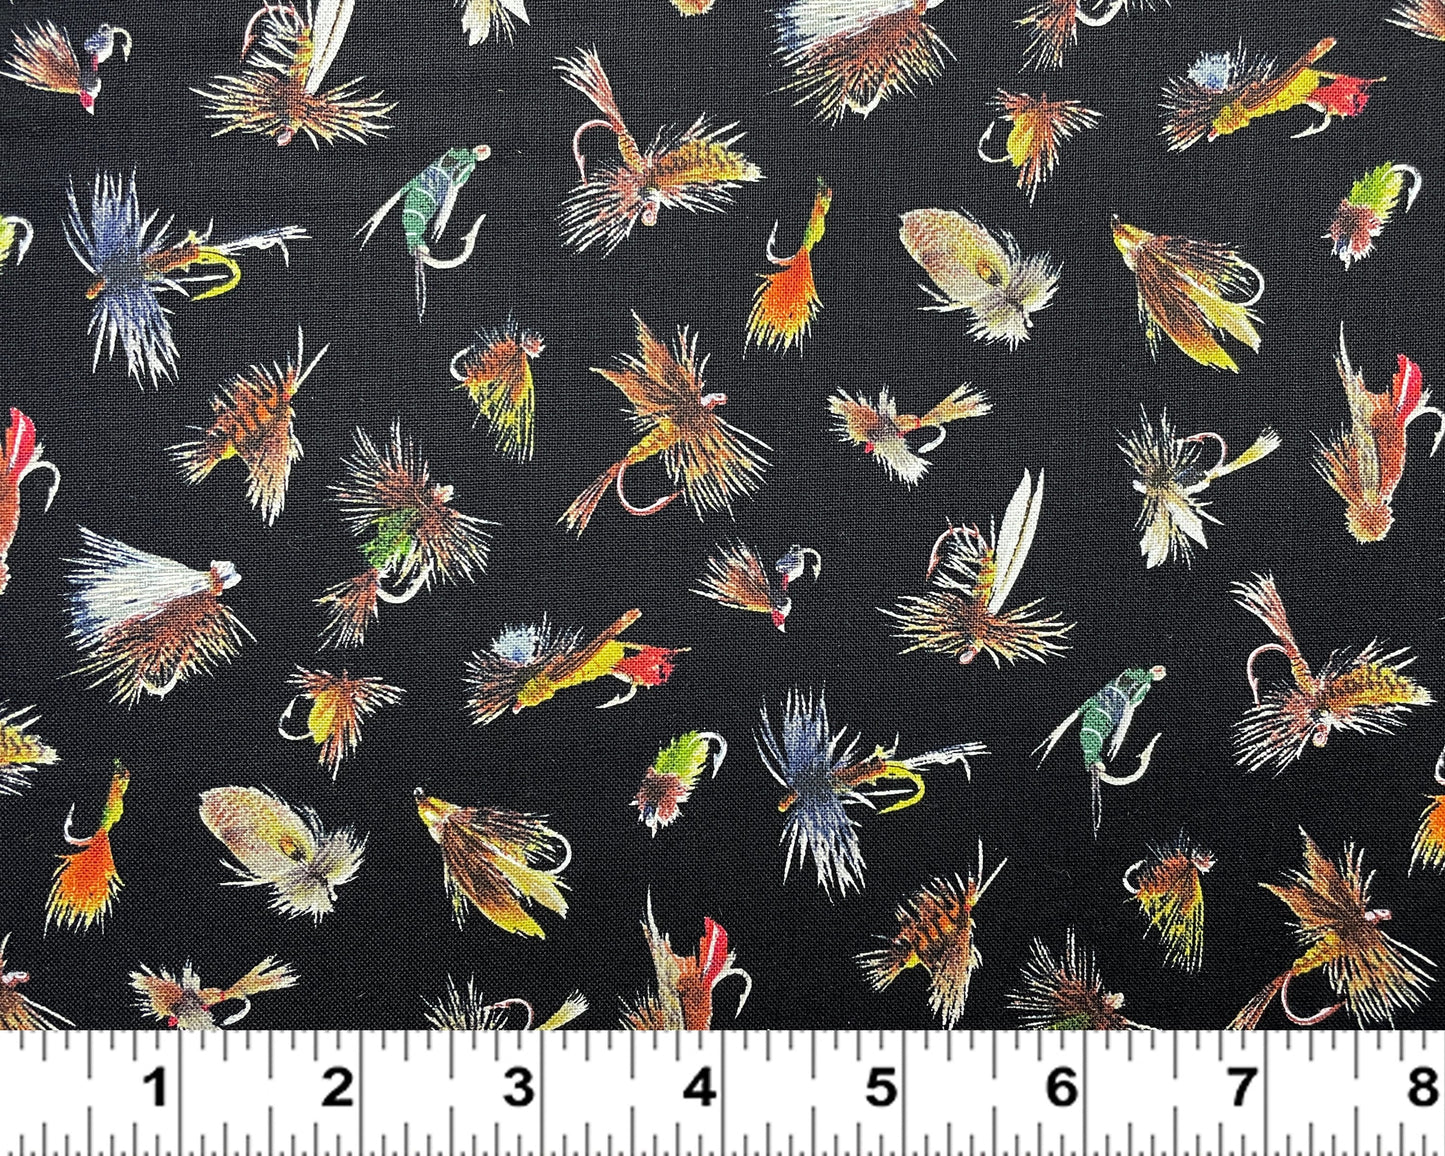 Fly Fishing Lures - Tight Lines collection by Elizabeth's Studio - 100% Cotton Fabric - Fly fishing theme fishing flies - SHIPS NEXT DAY